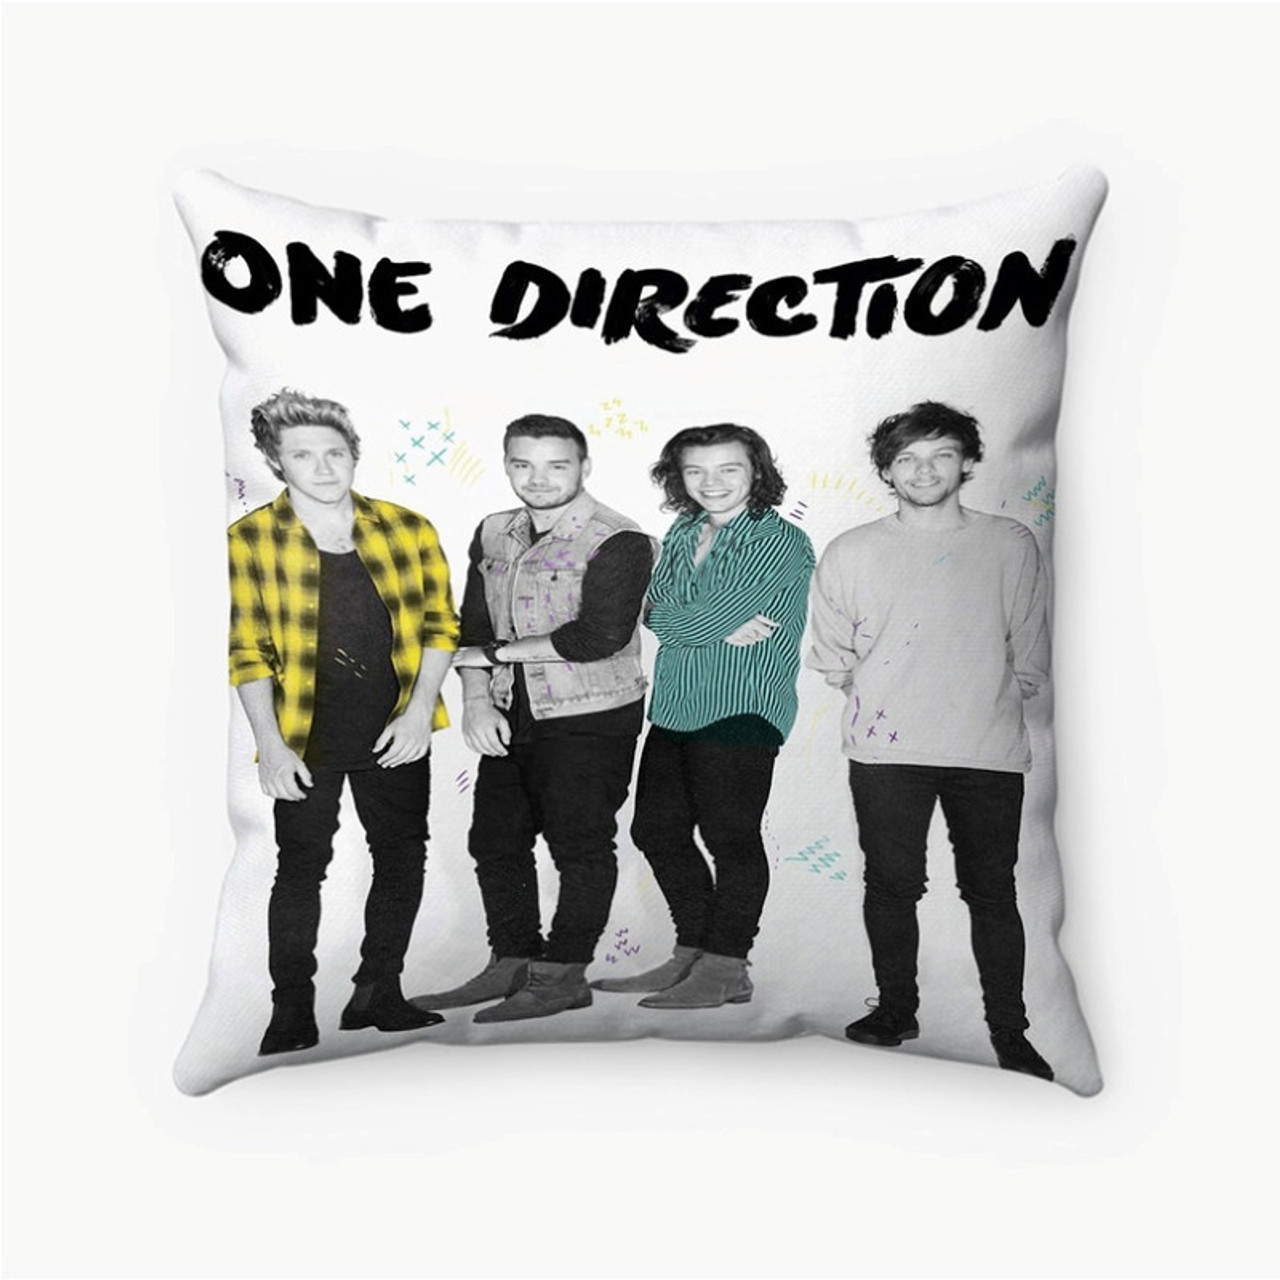 https://cdn11.bigcommerce.com/s-xhmrmcecz5/images/stencil/1280x1280/products/198093/203453/One-Direction-Photo-Session-Custom-Pillow-Case__11054.1673596379.jpg?c=1